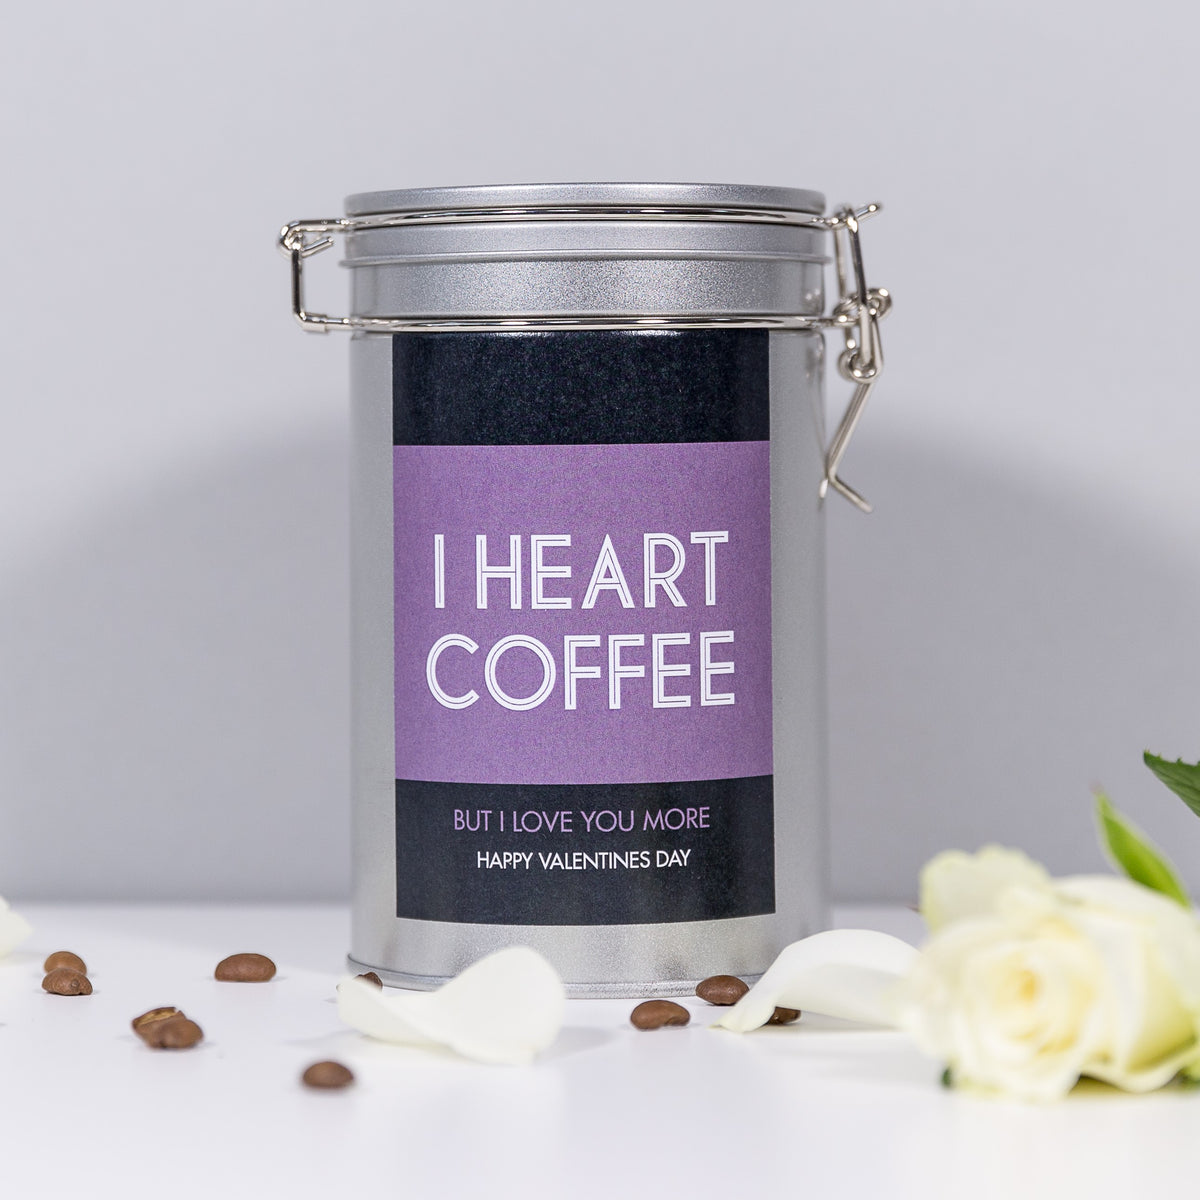 Personalised 'A Latte Love' Coffee Gift In Tin